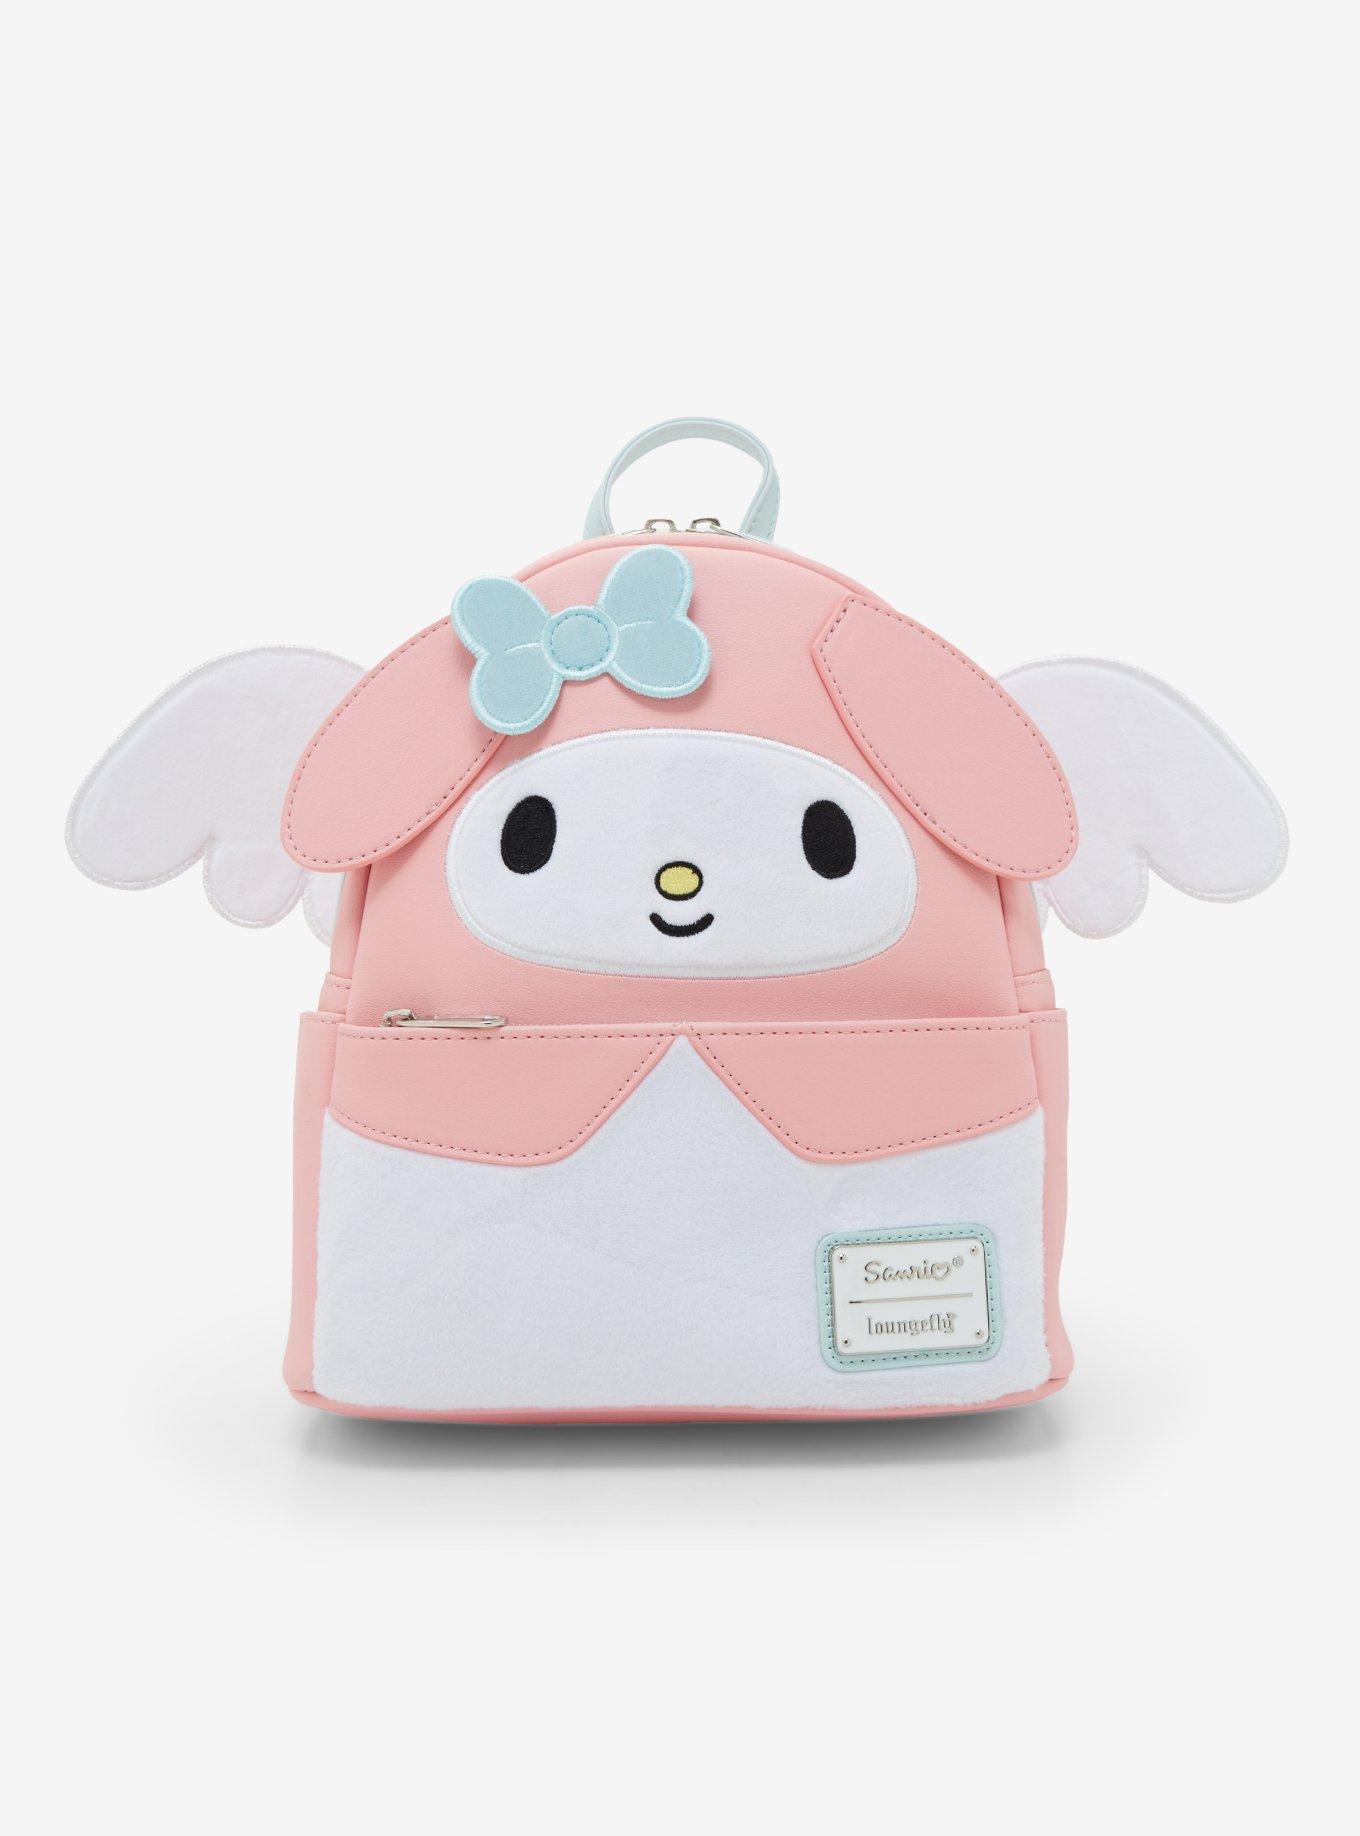 Loungefly My Melody Angel Mini Backpack, , hi-res